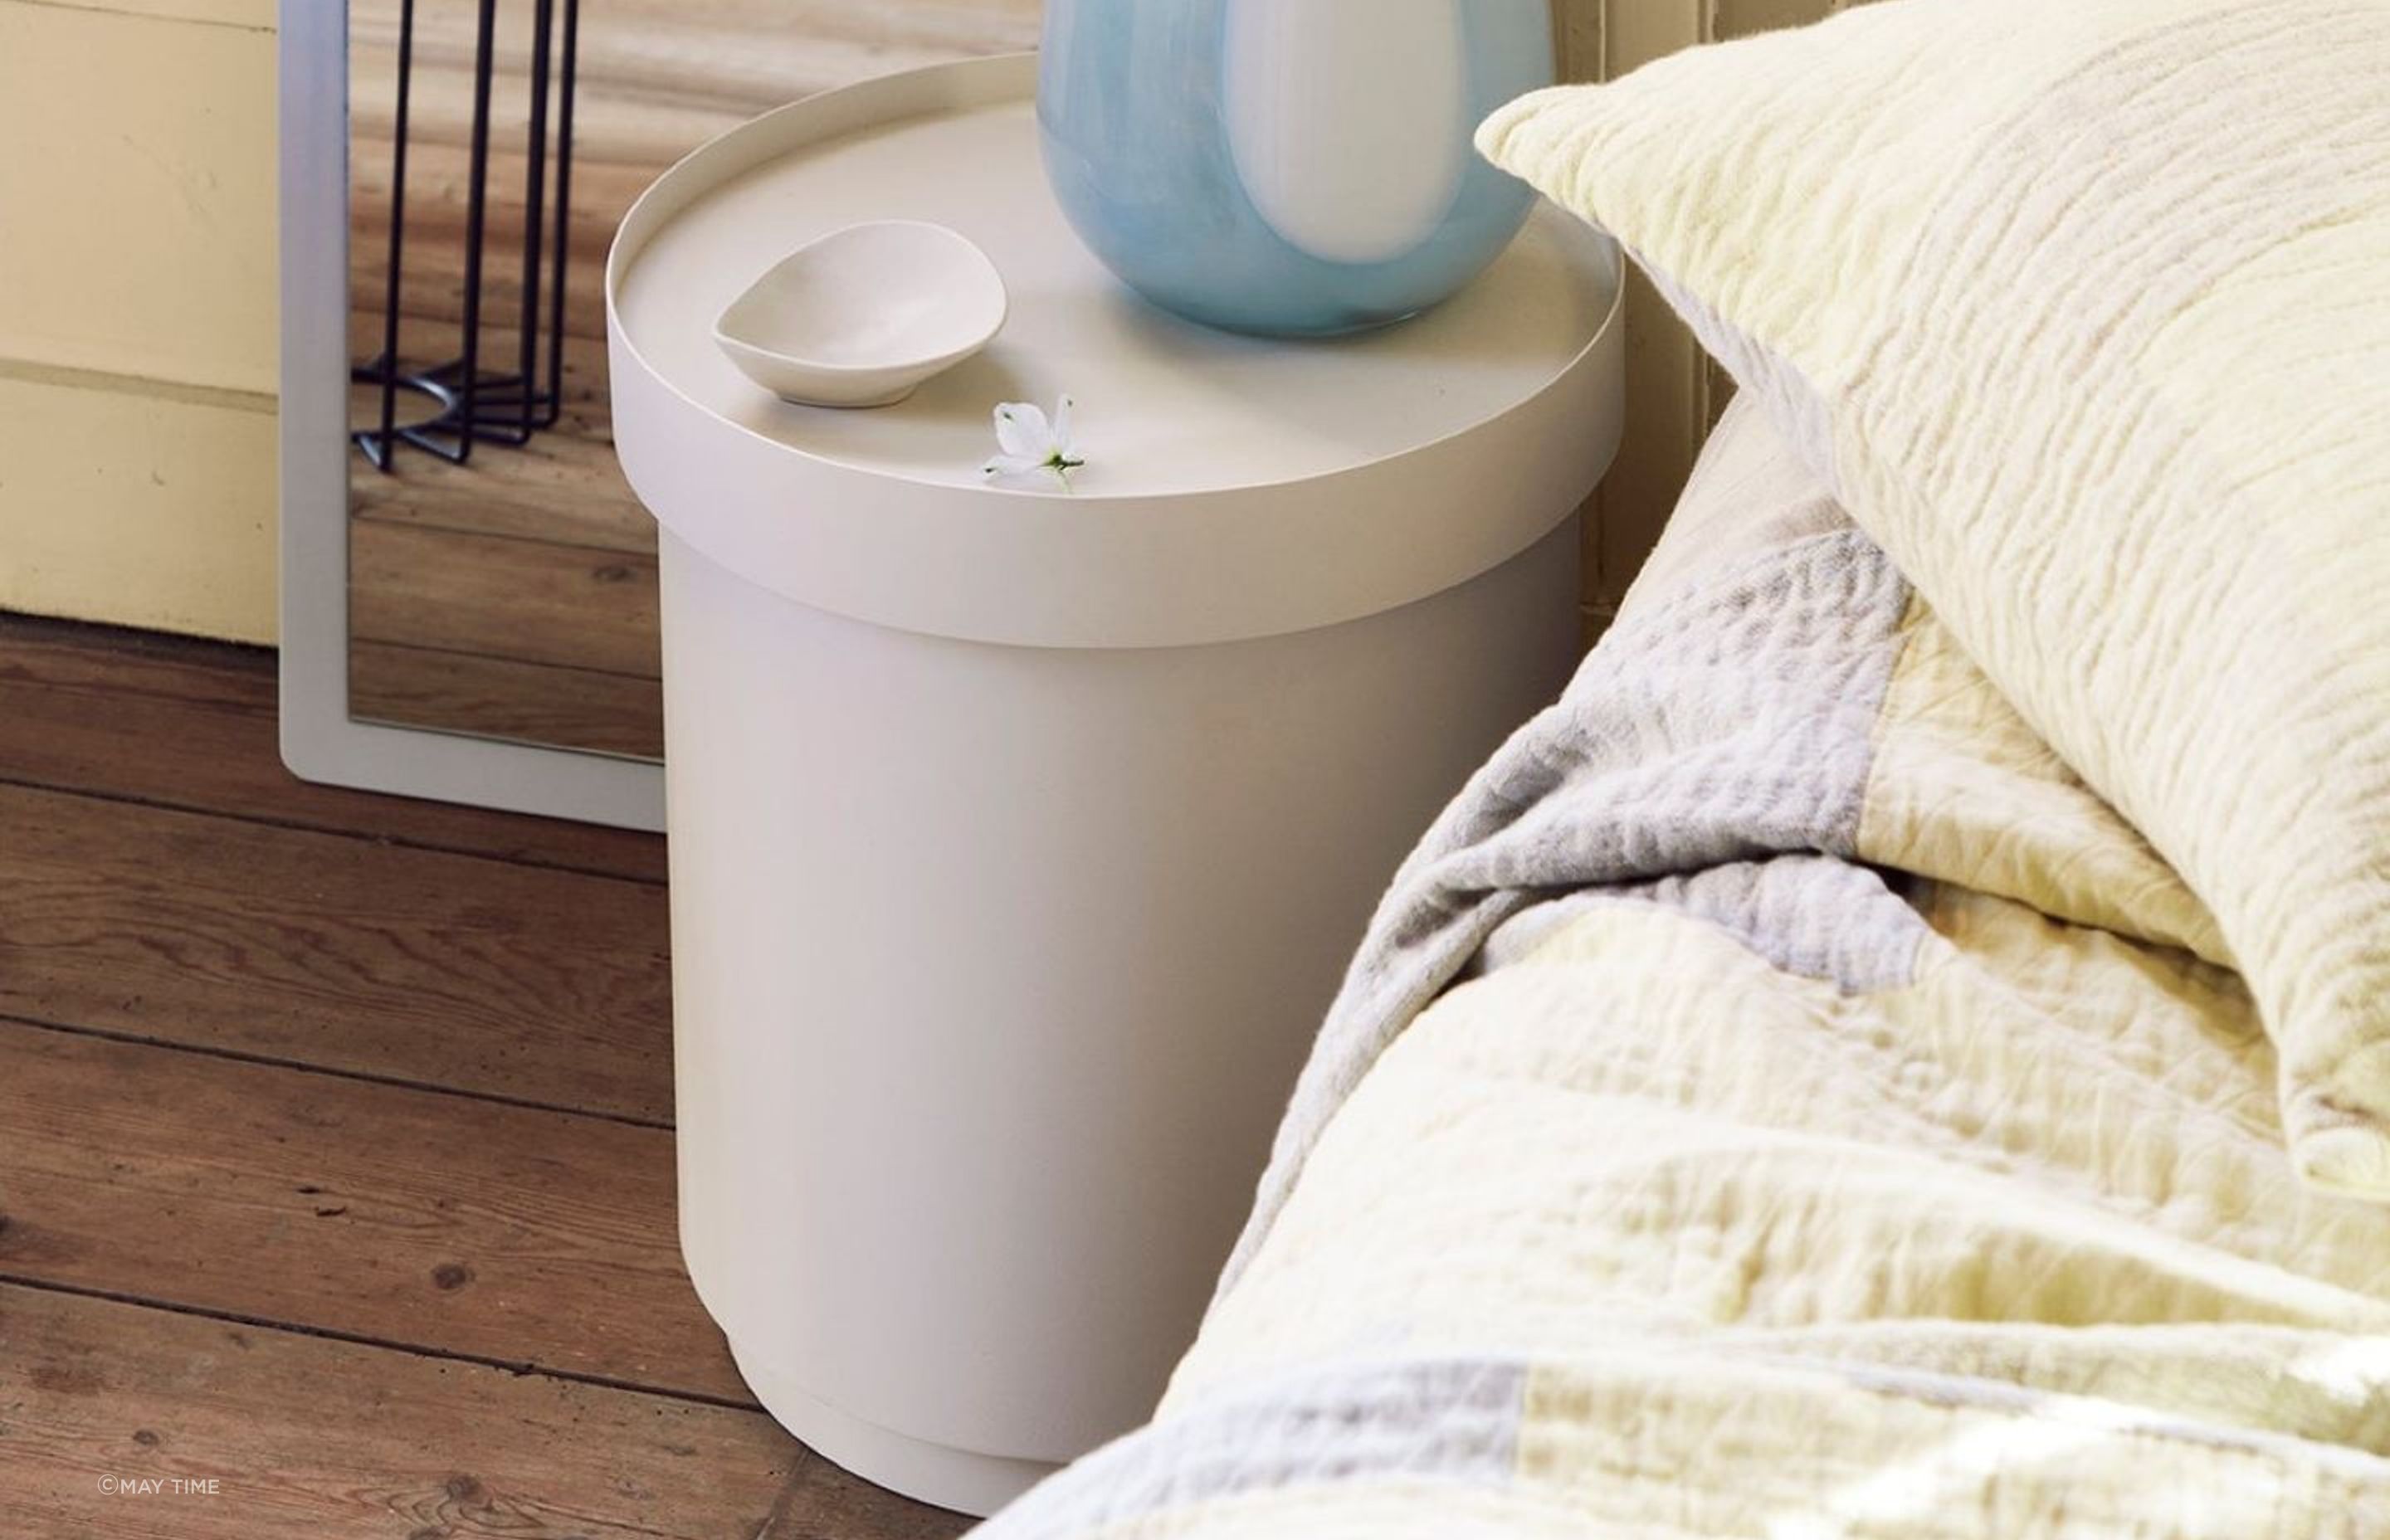 The versatile Broste Ninna Storage Side Table makes for a perfectly functional and stylish bedside table.